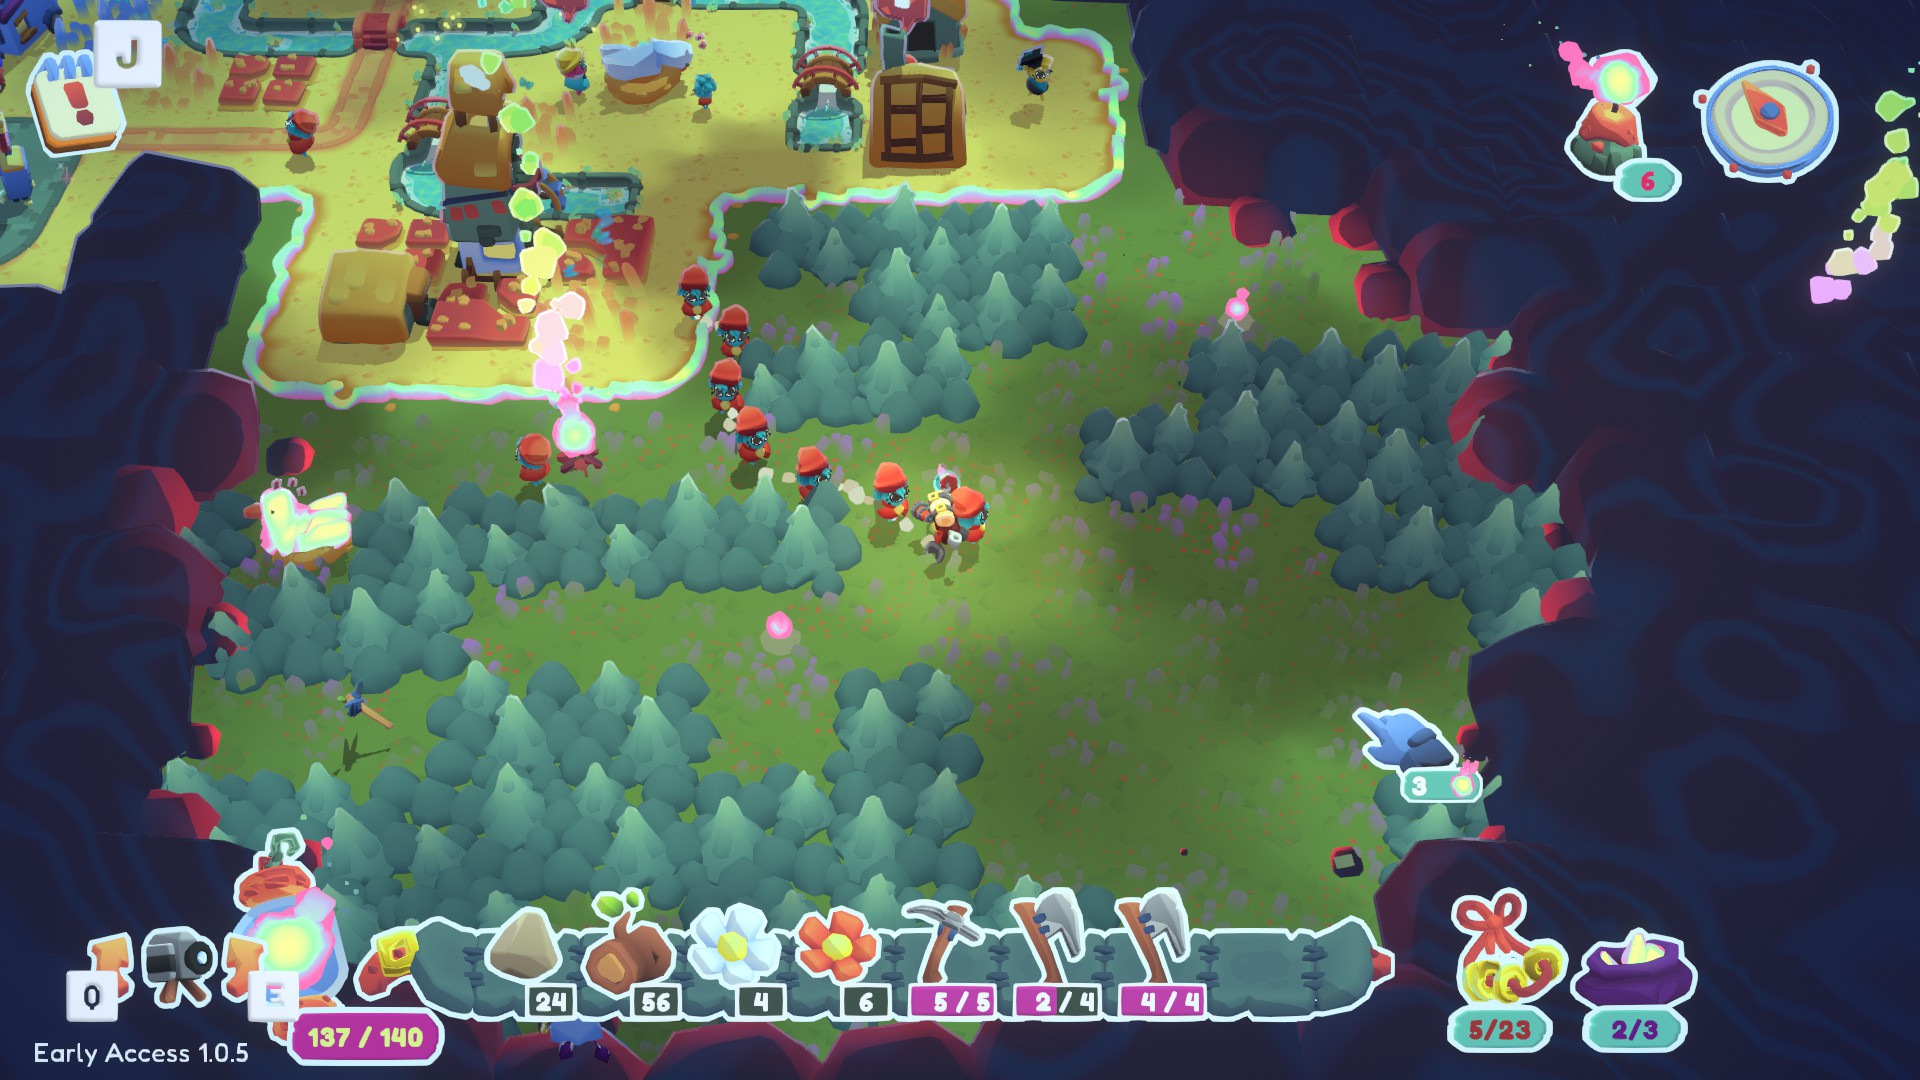 The player character followed by a line of villagers in Into the Emberlands.